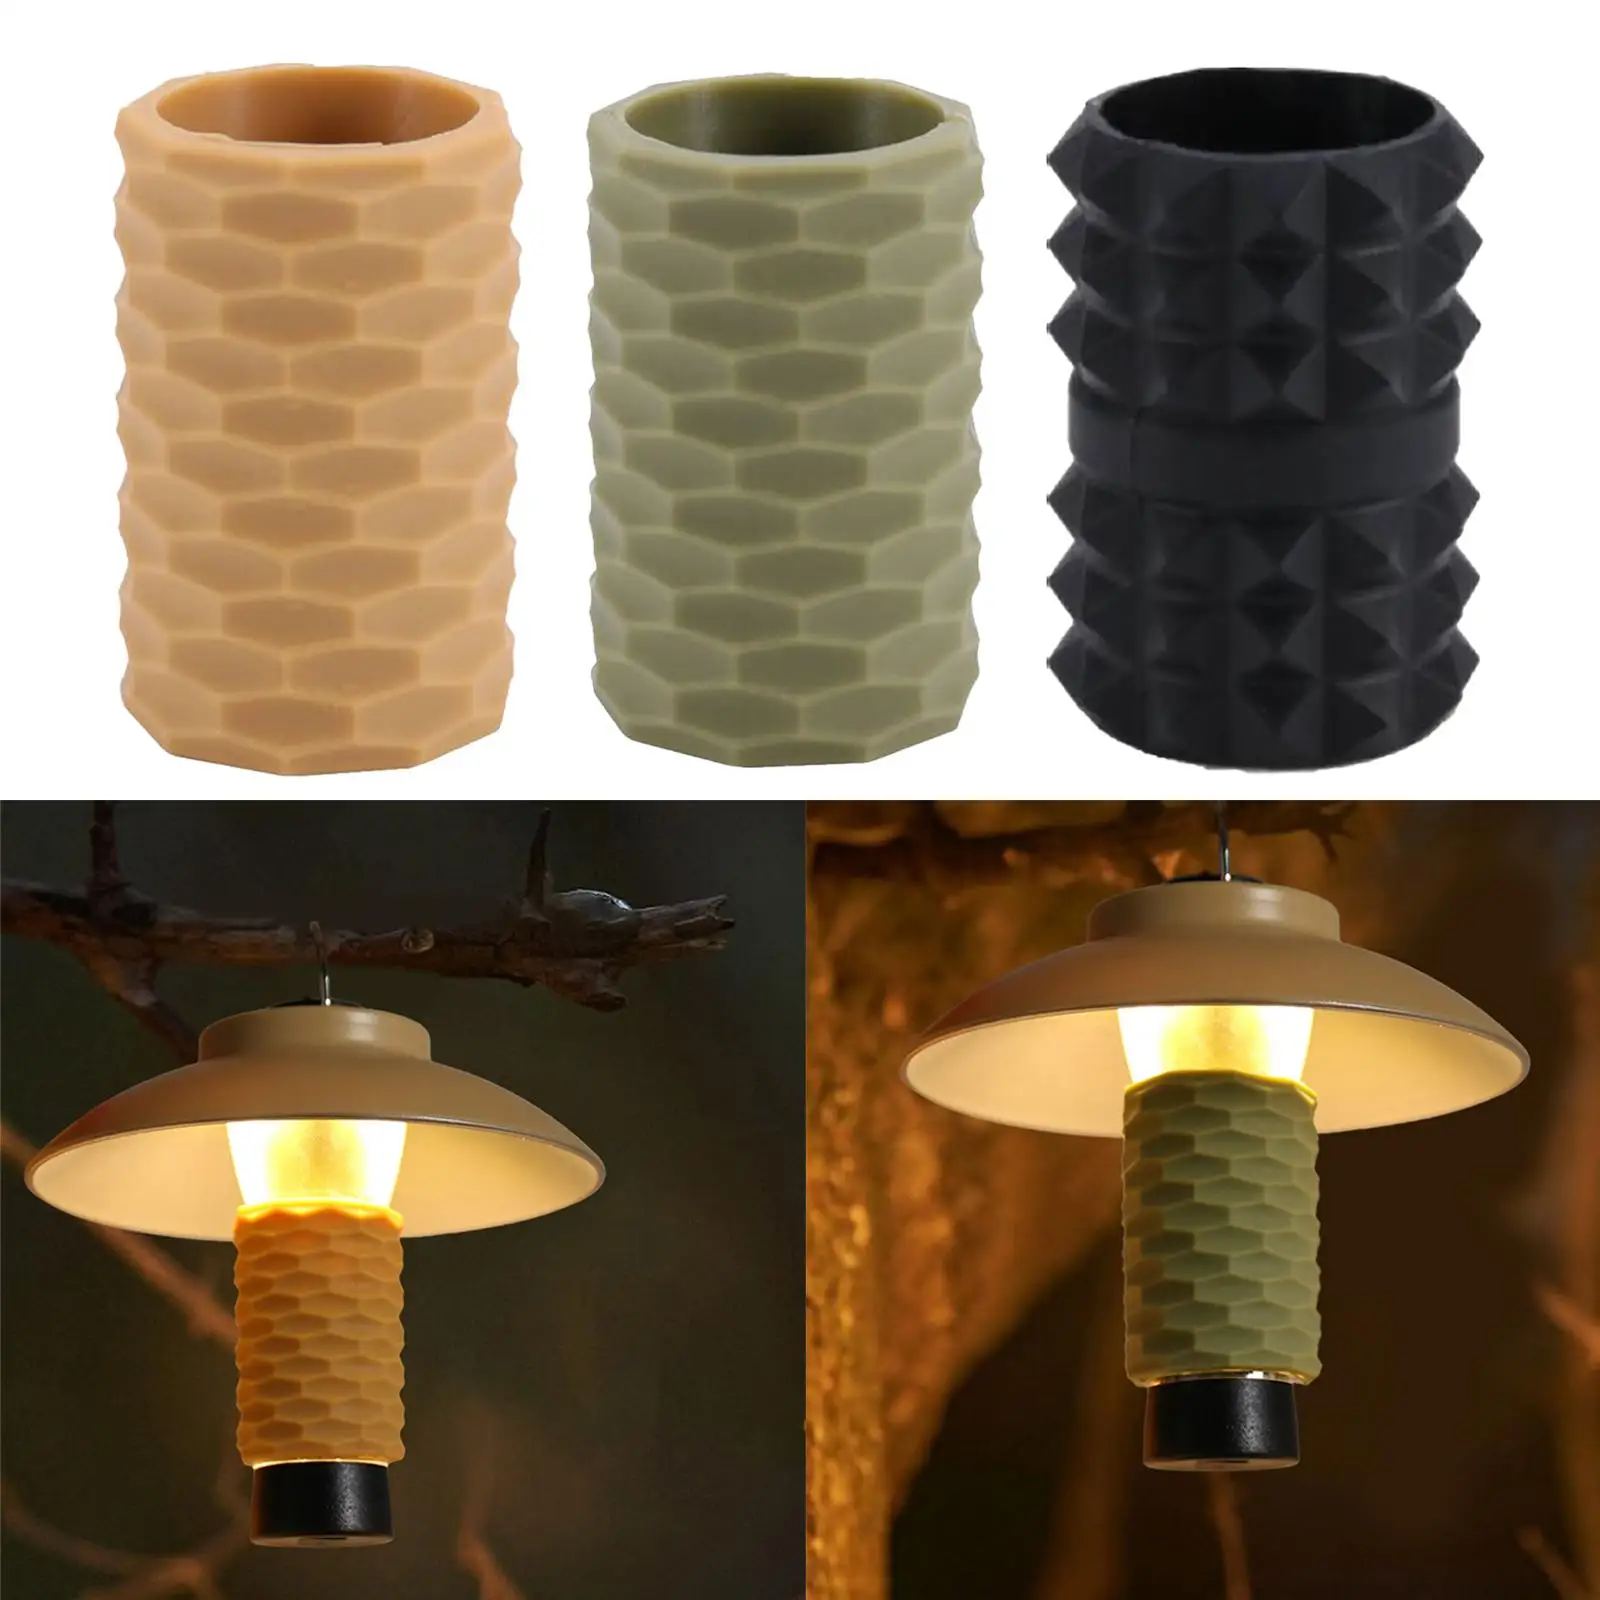 Lamp Sleeve Cover Camping Lights Cover Flashlight Sleeves Lighthouse Fishing